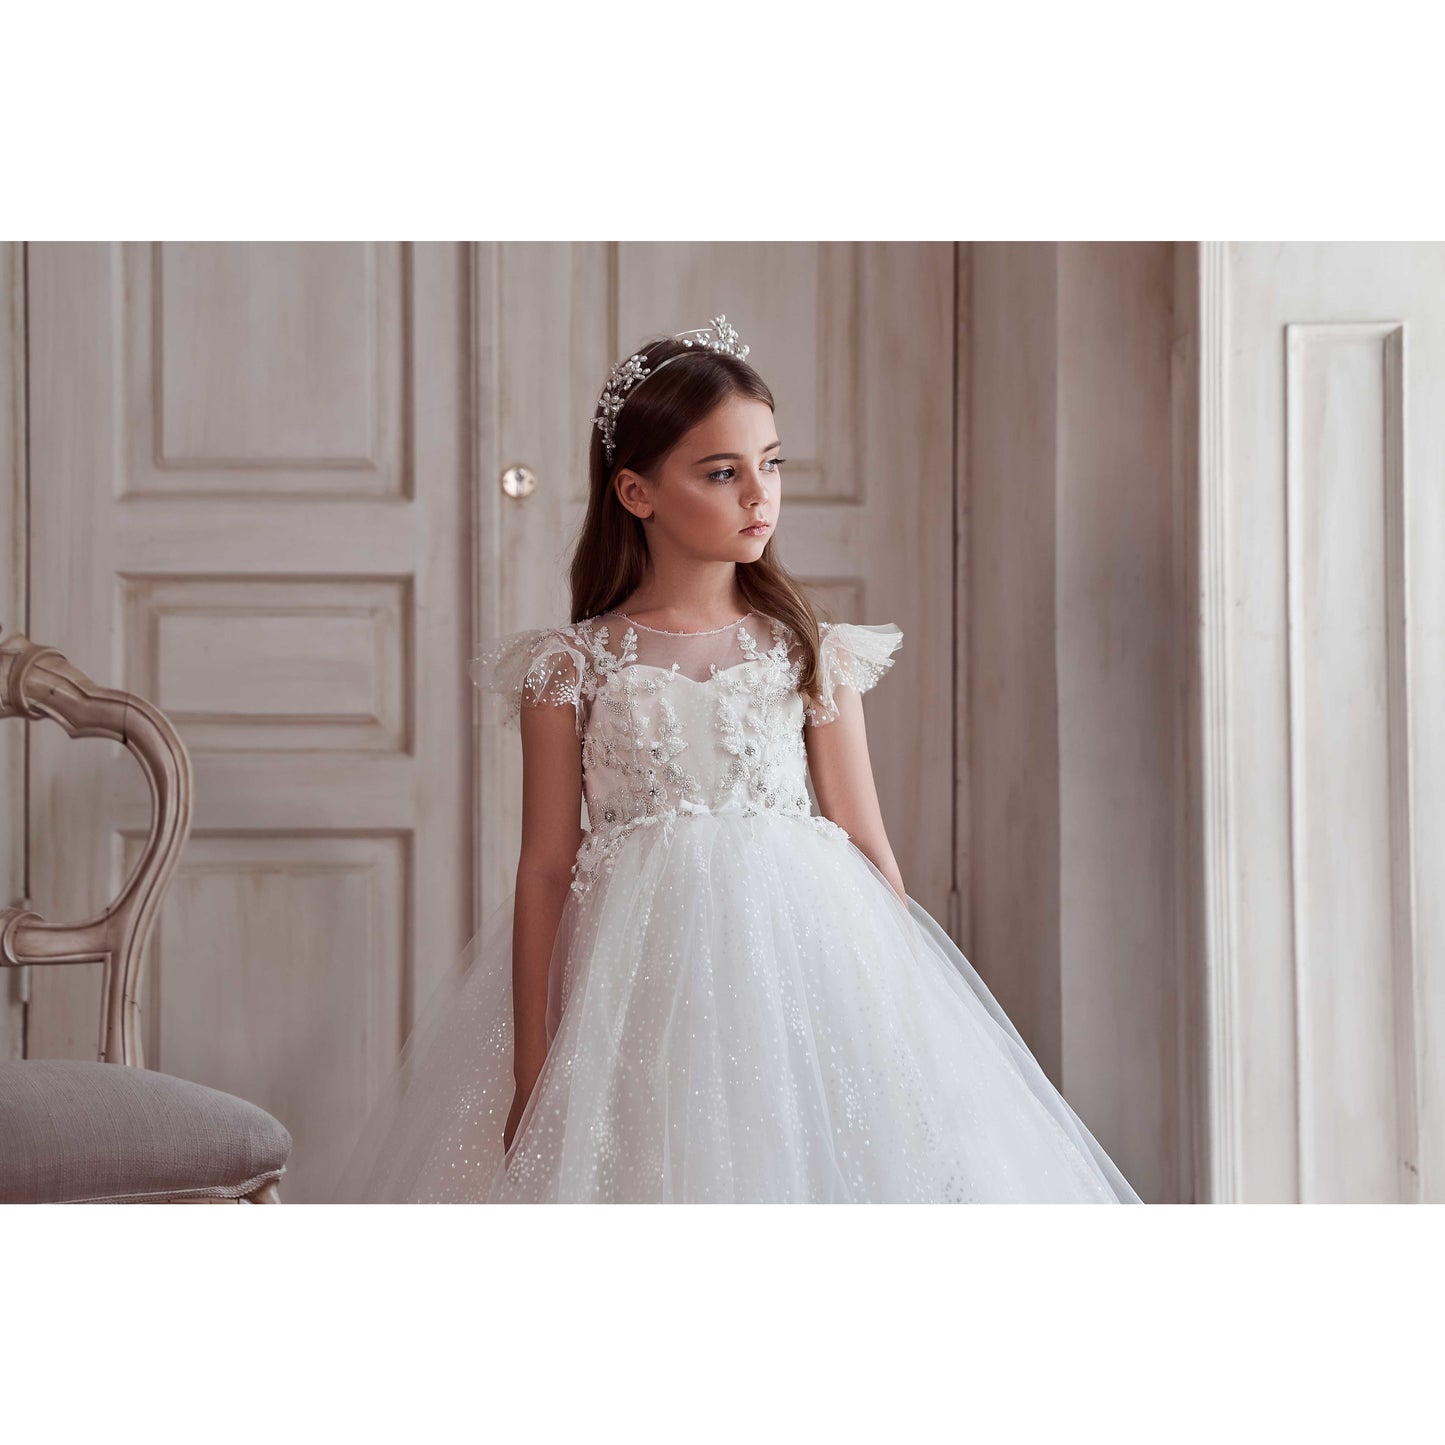 embroidery, lace, beads girl's flower girl dress